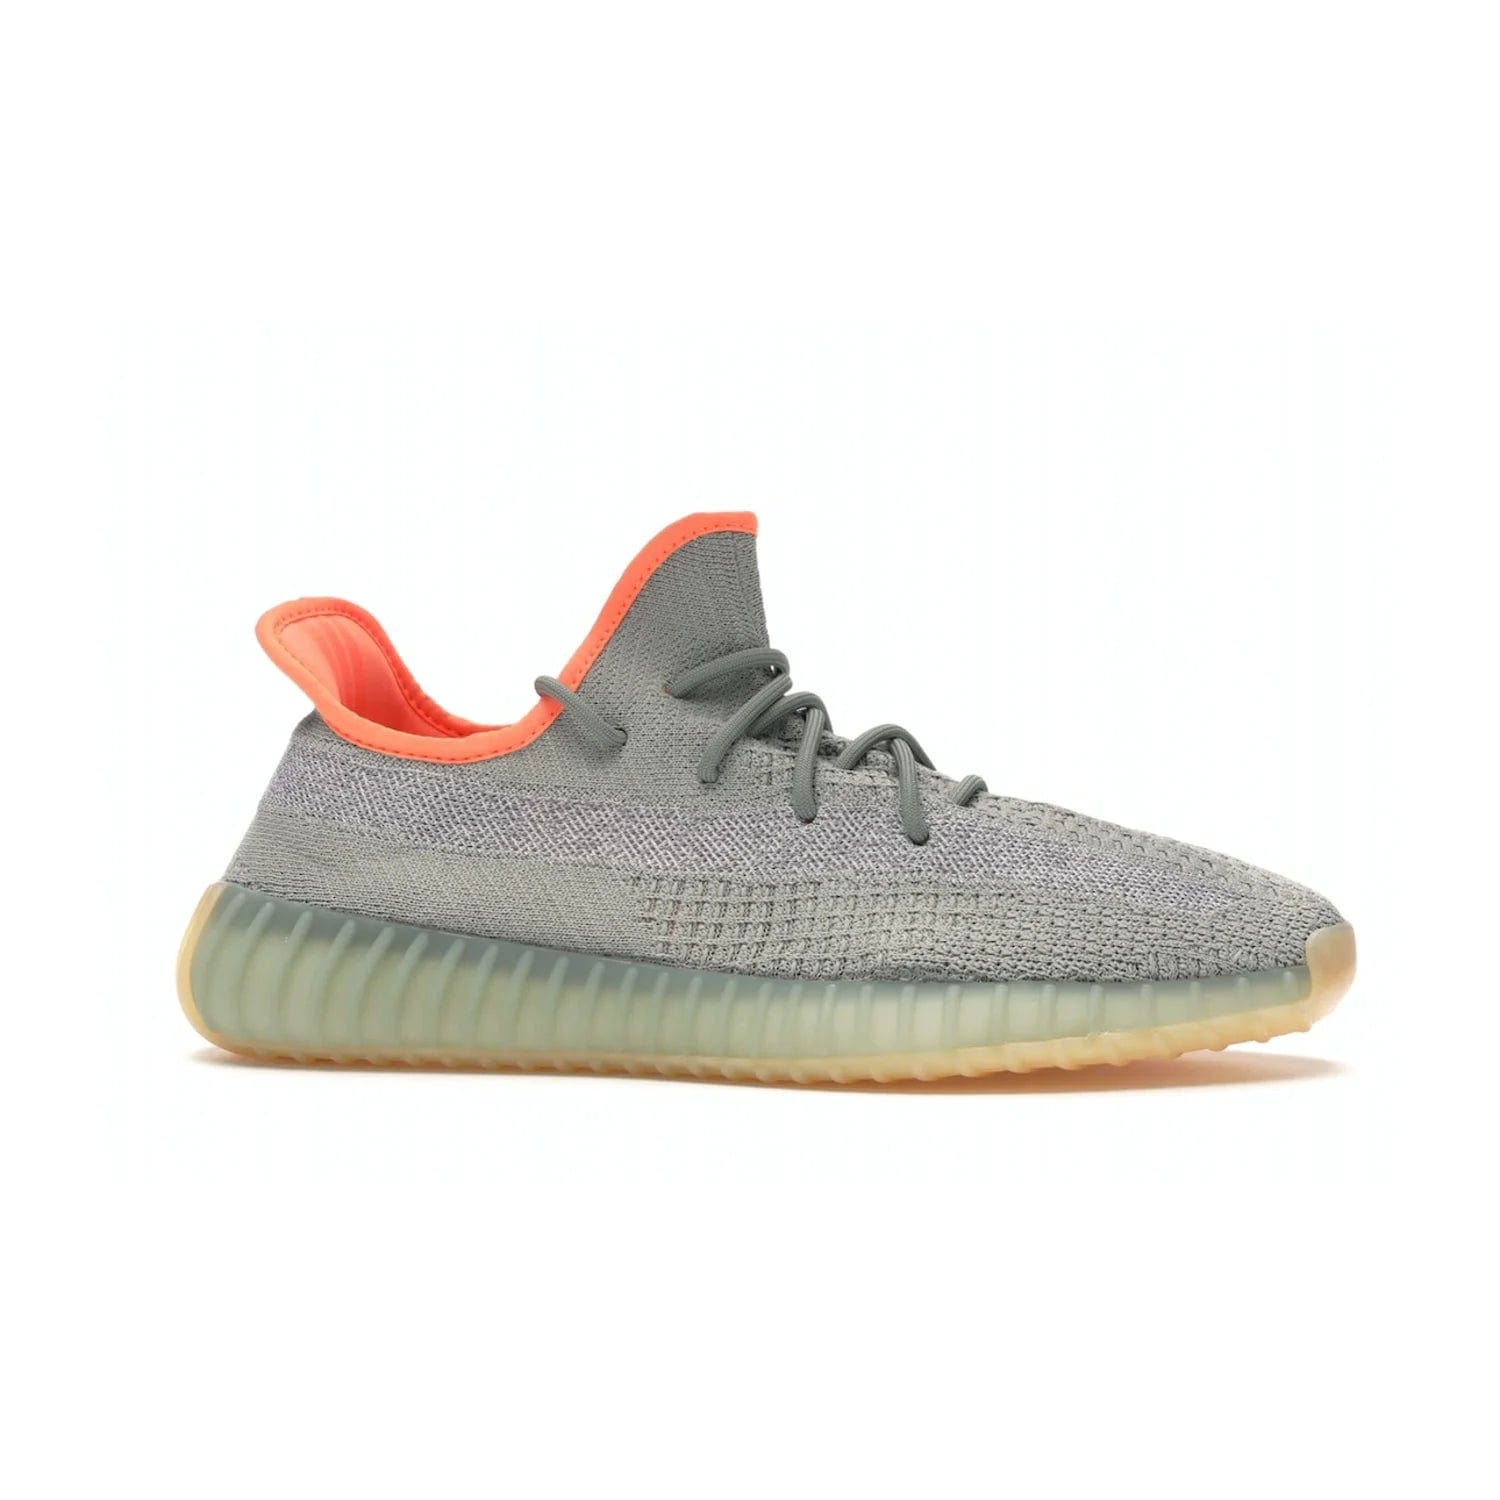 adidas Yeezy Boost 350 V2 Desert Sage - Image 2 - Only at www.BallersClubKickz.com - Upgrade your style with the adidas Yeezy Boost 350 V2 Desert Sage. This 350V2 features a Desert Sage primeknit upper with tonal side stripe, and an orange-highlighted translucent Boost cushioning sole. Stay on-trend in effortless style.